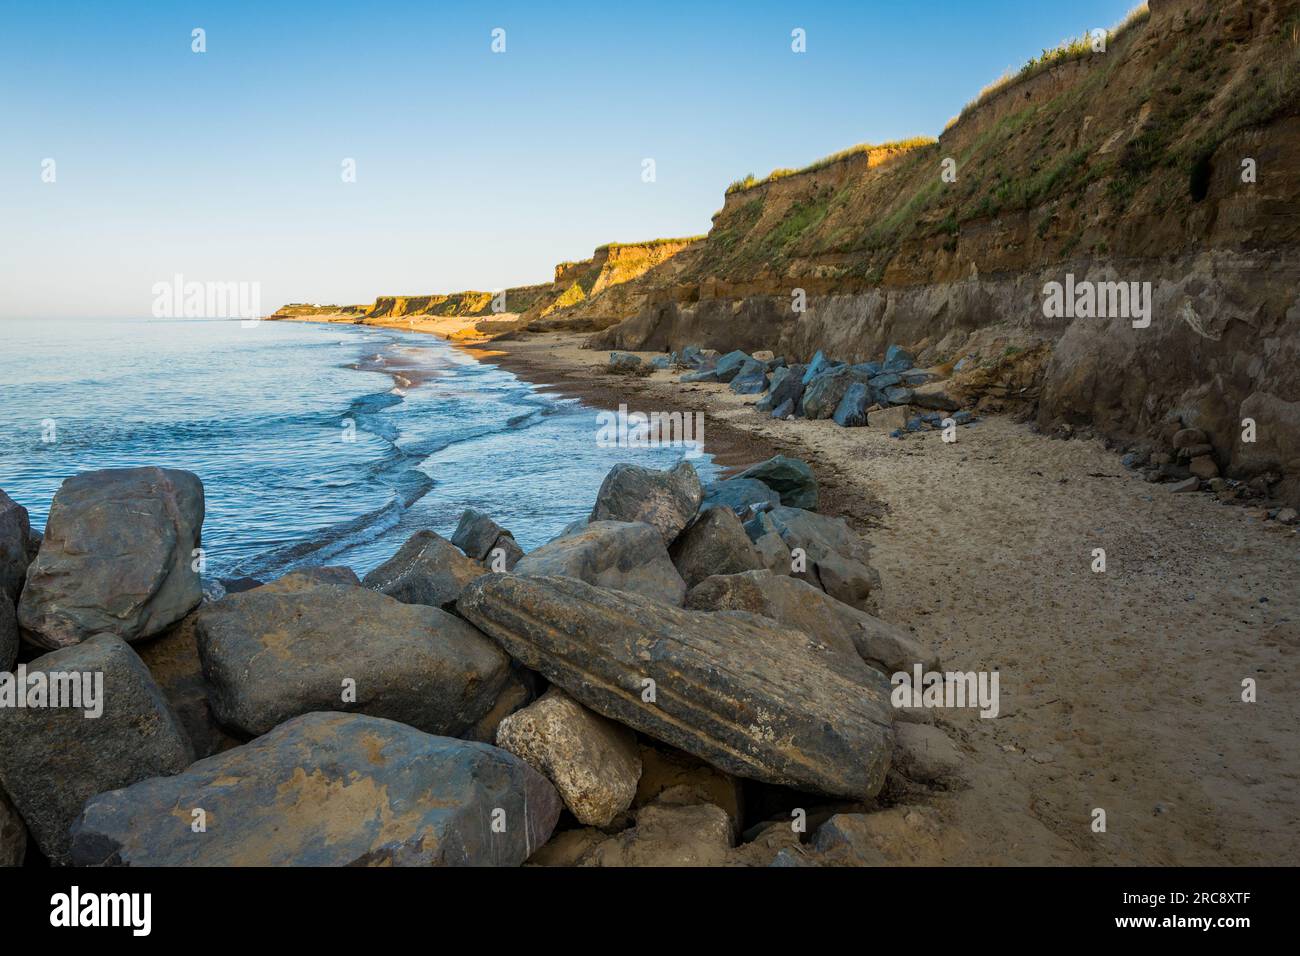 Sea defences and land erosion on the North sea coast at Happisburgh in Norfolk, England Stock Photo